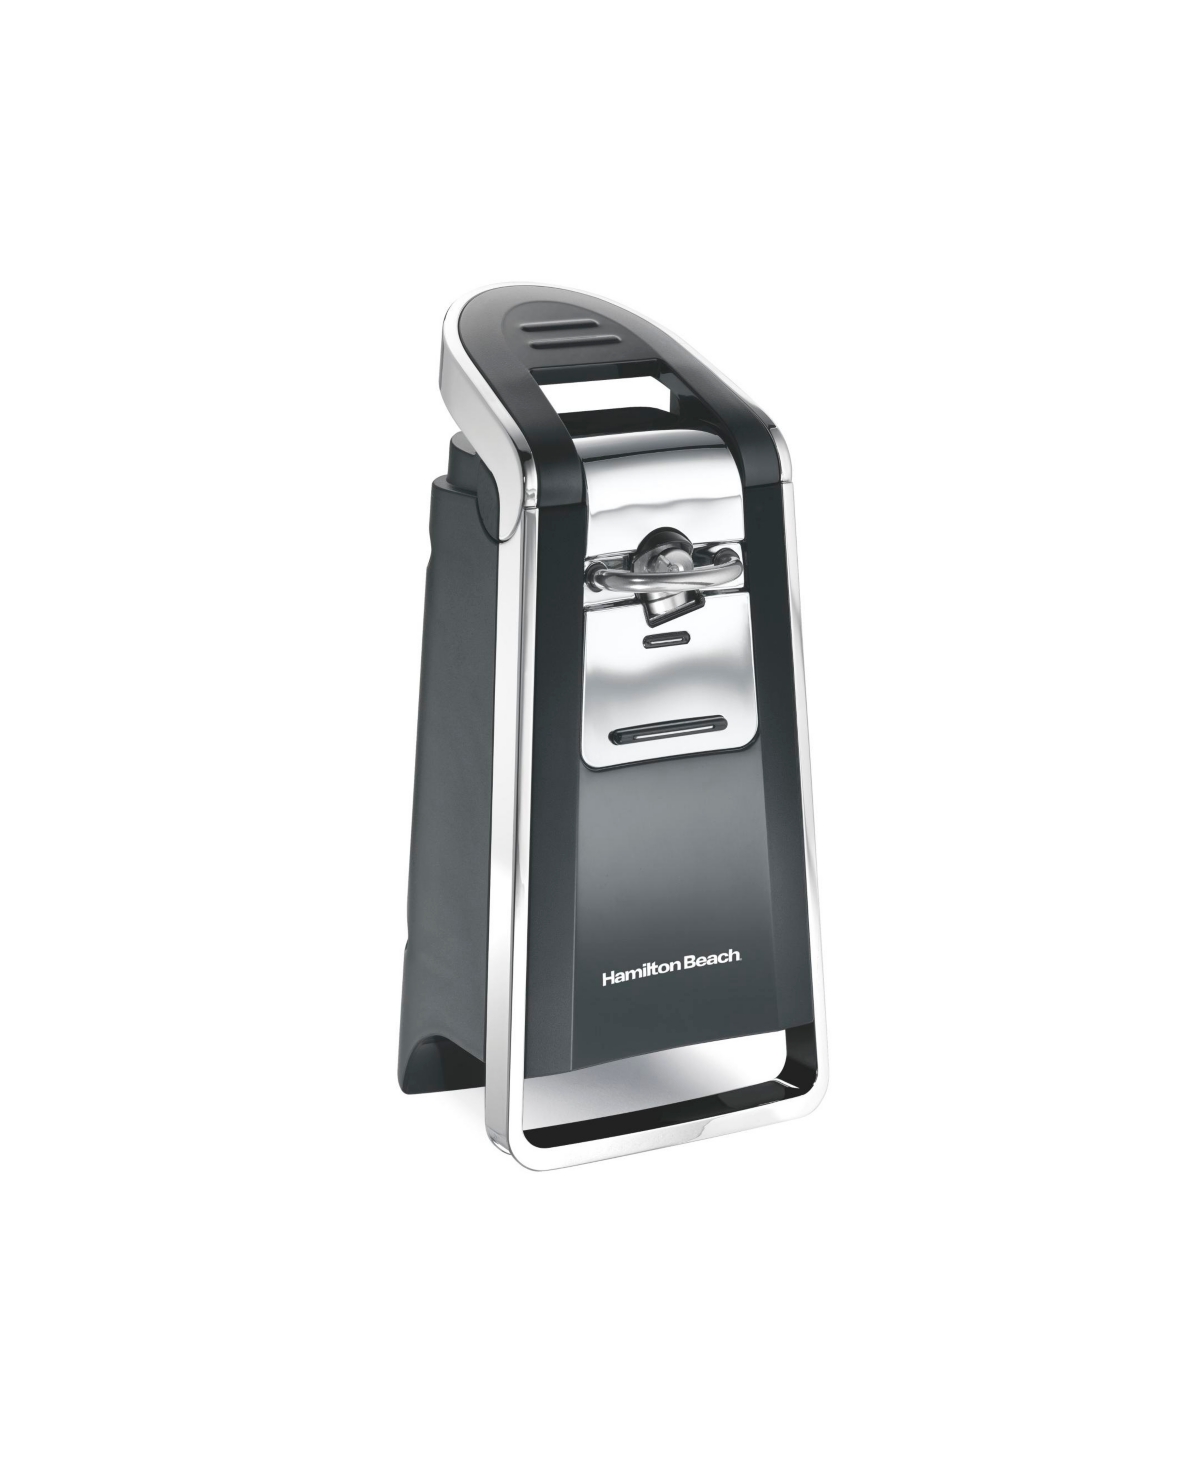 Hamilton Beach Smooth Touch Can Opener In Black